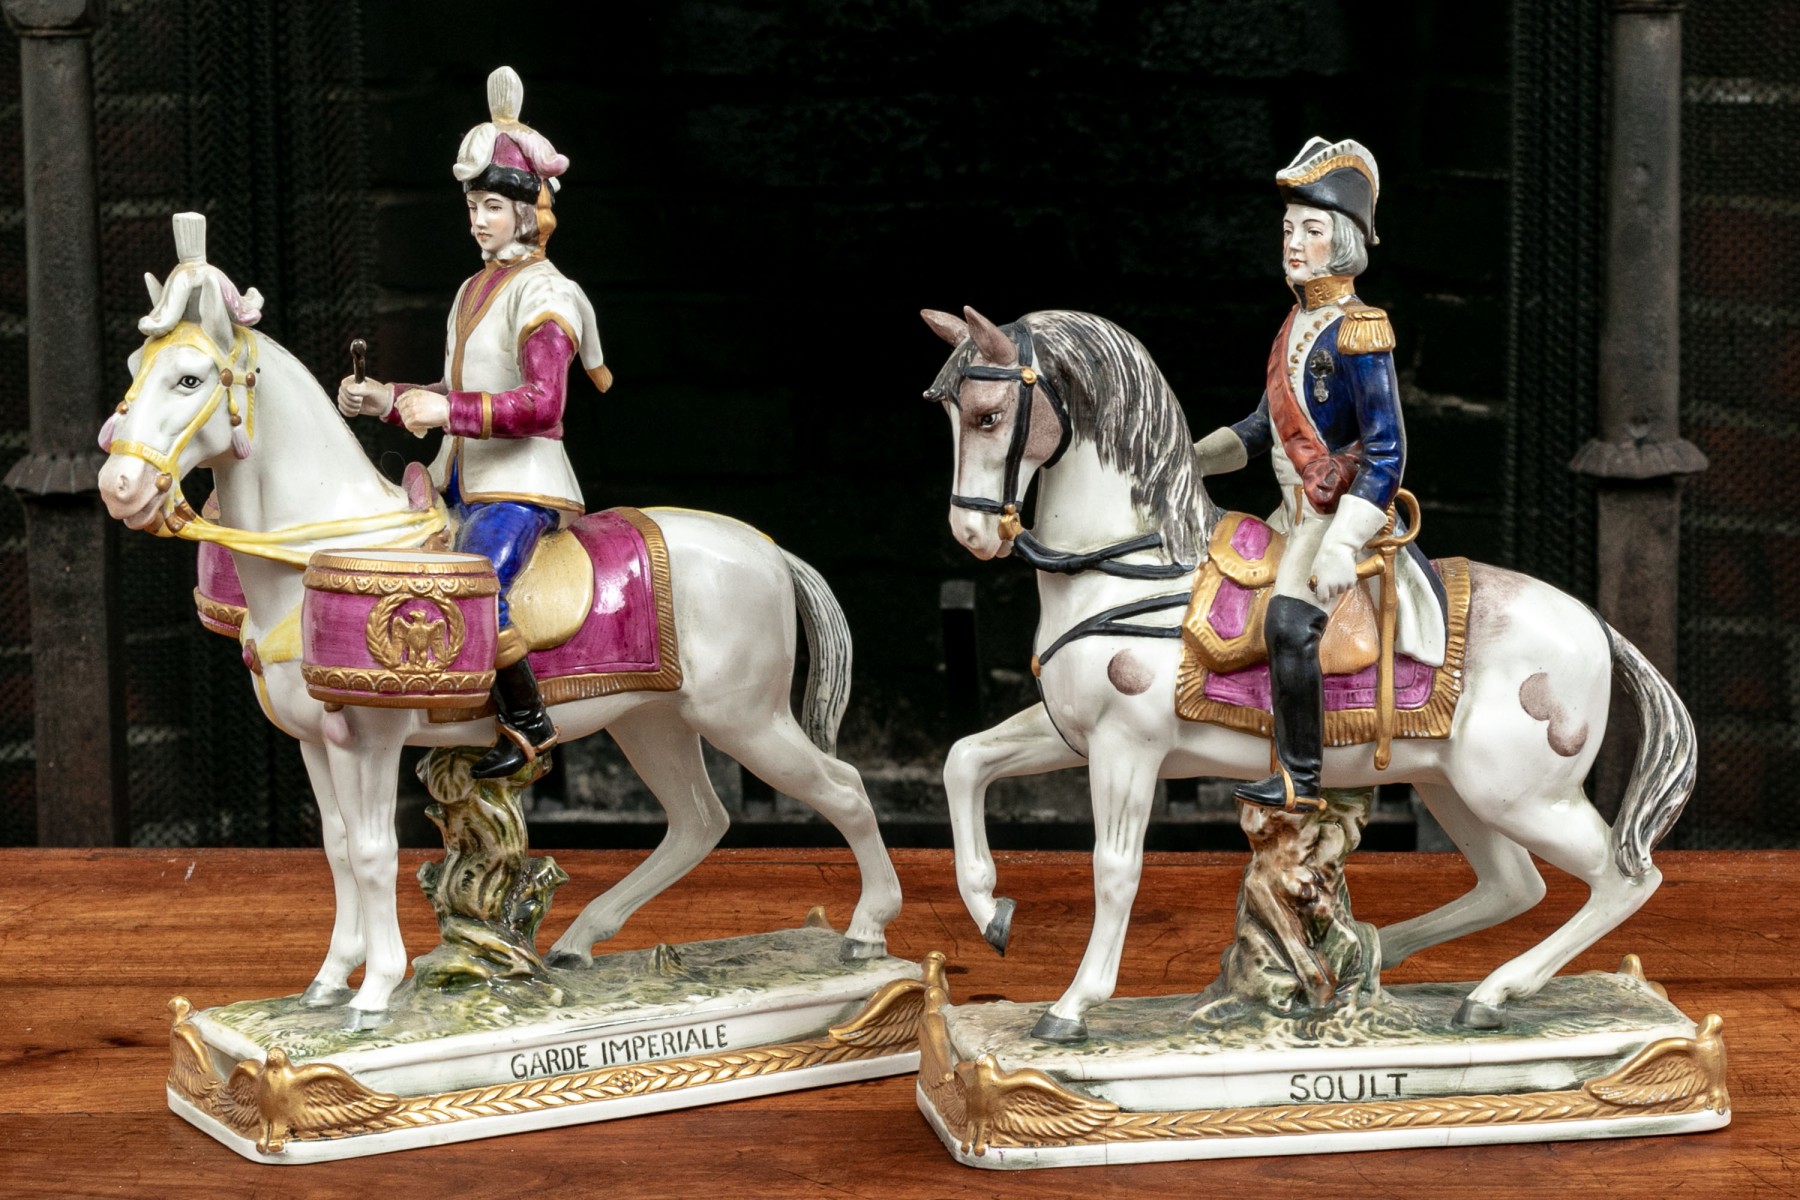 Collecting Antique Figurines: More Than Royal Doulton